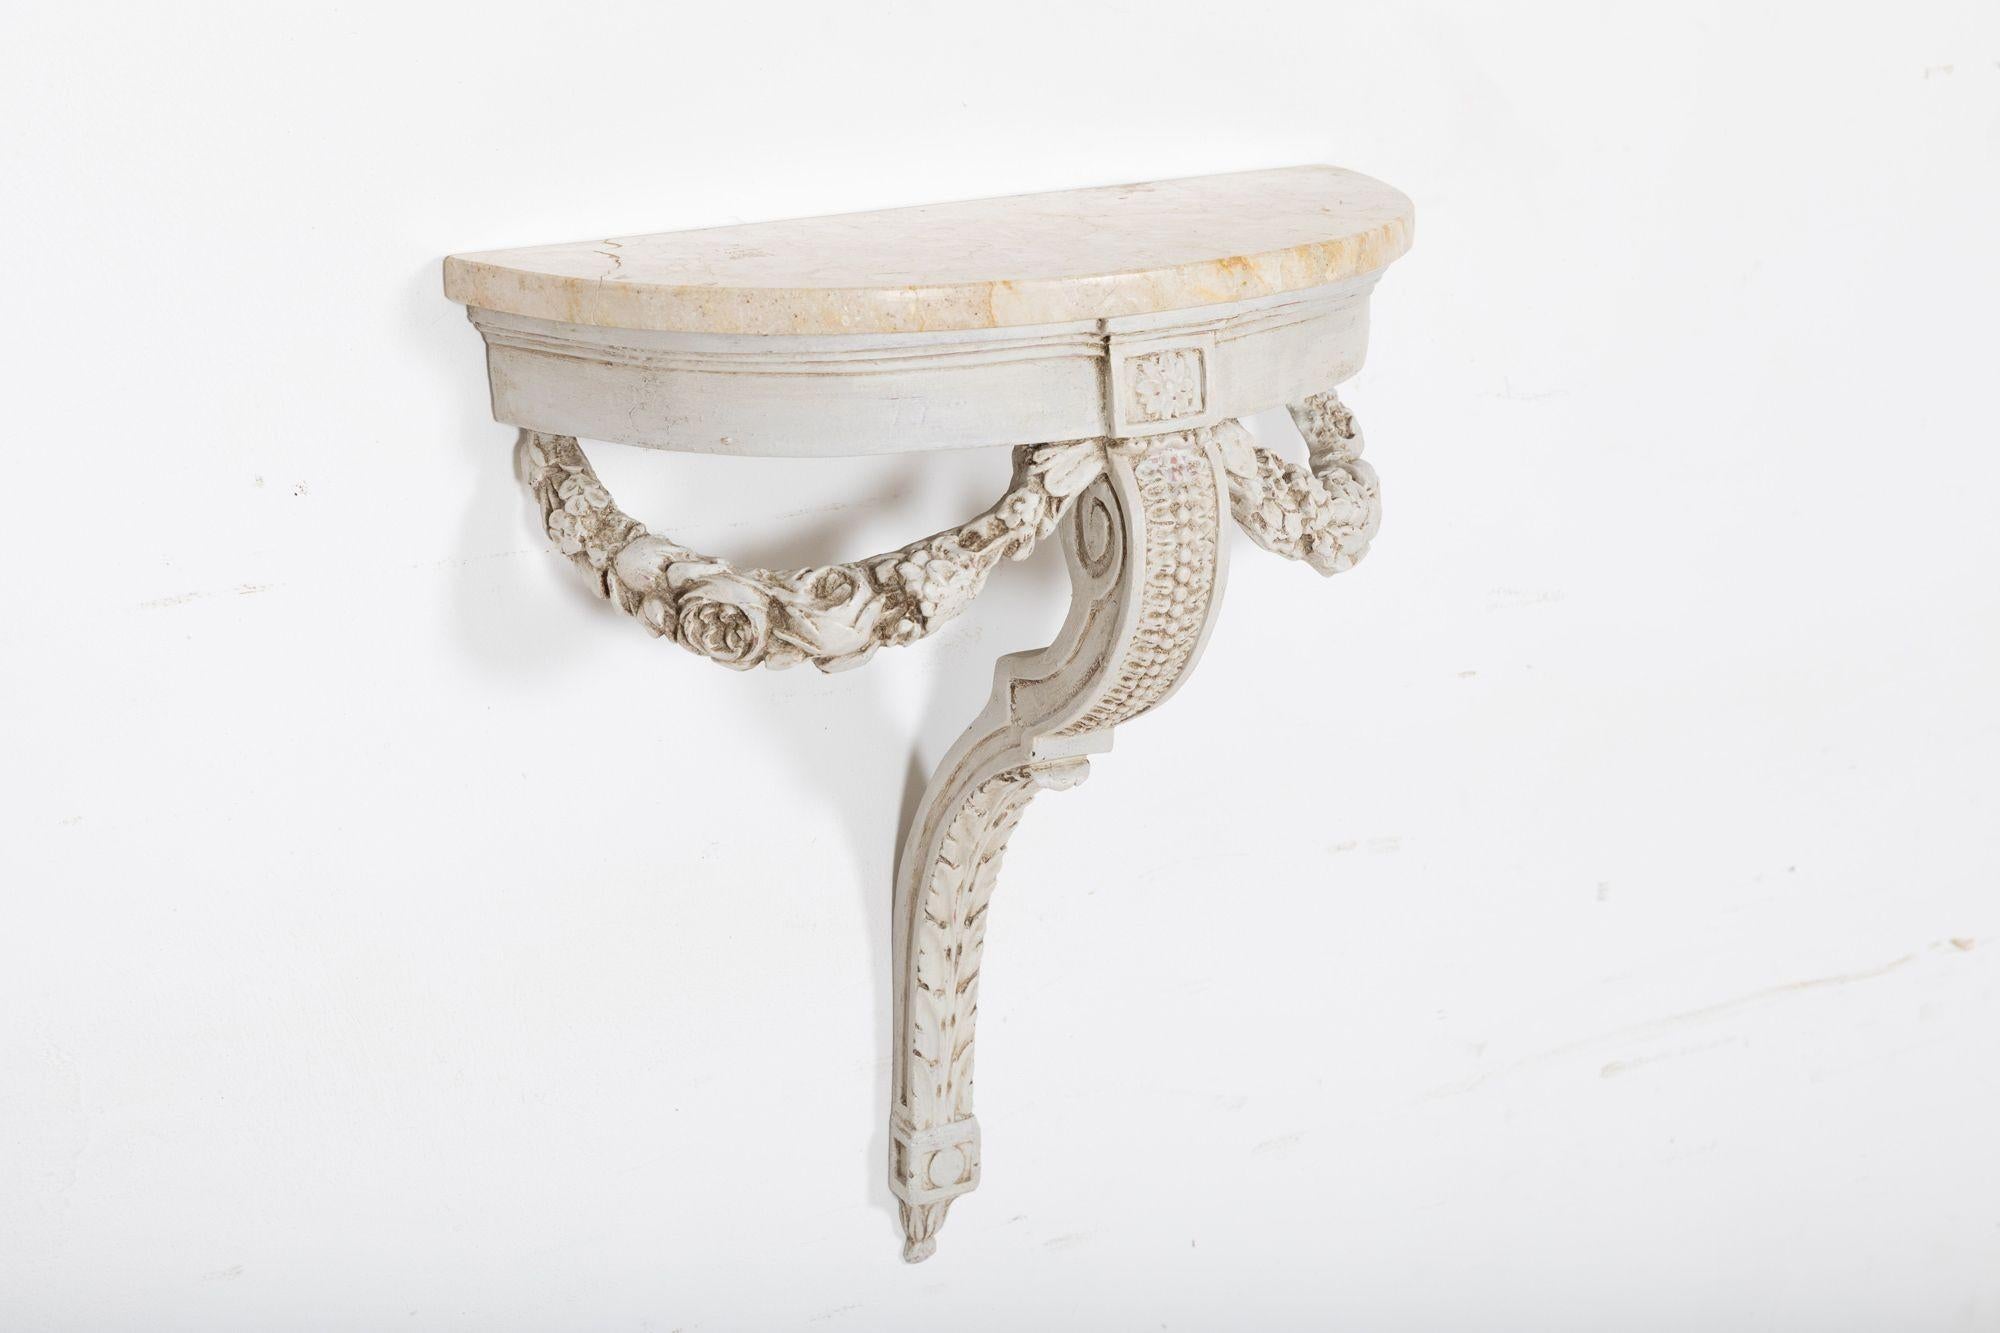 circa 1930
French Neoclassical painted marble console table
(note past restoration repair to marble corner)
sku 1084
Measures: W47 x D21 x H53 cm.








 